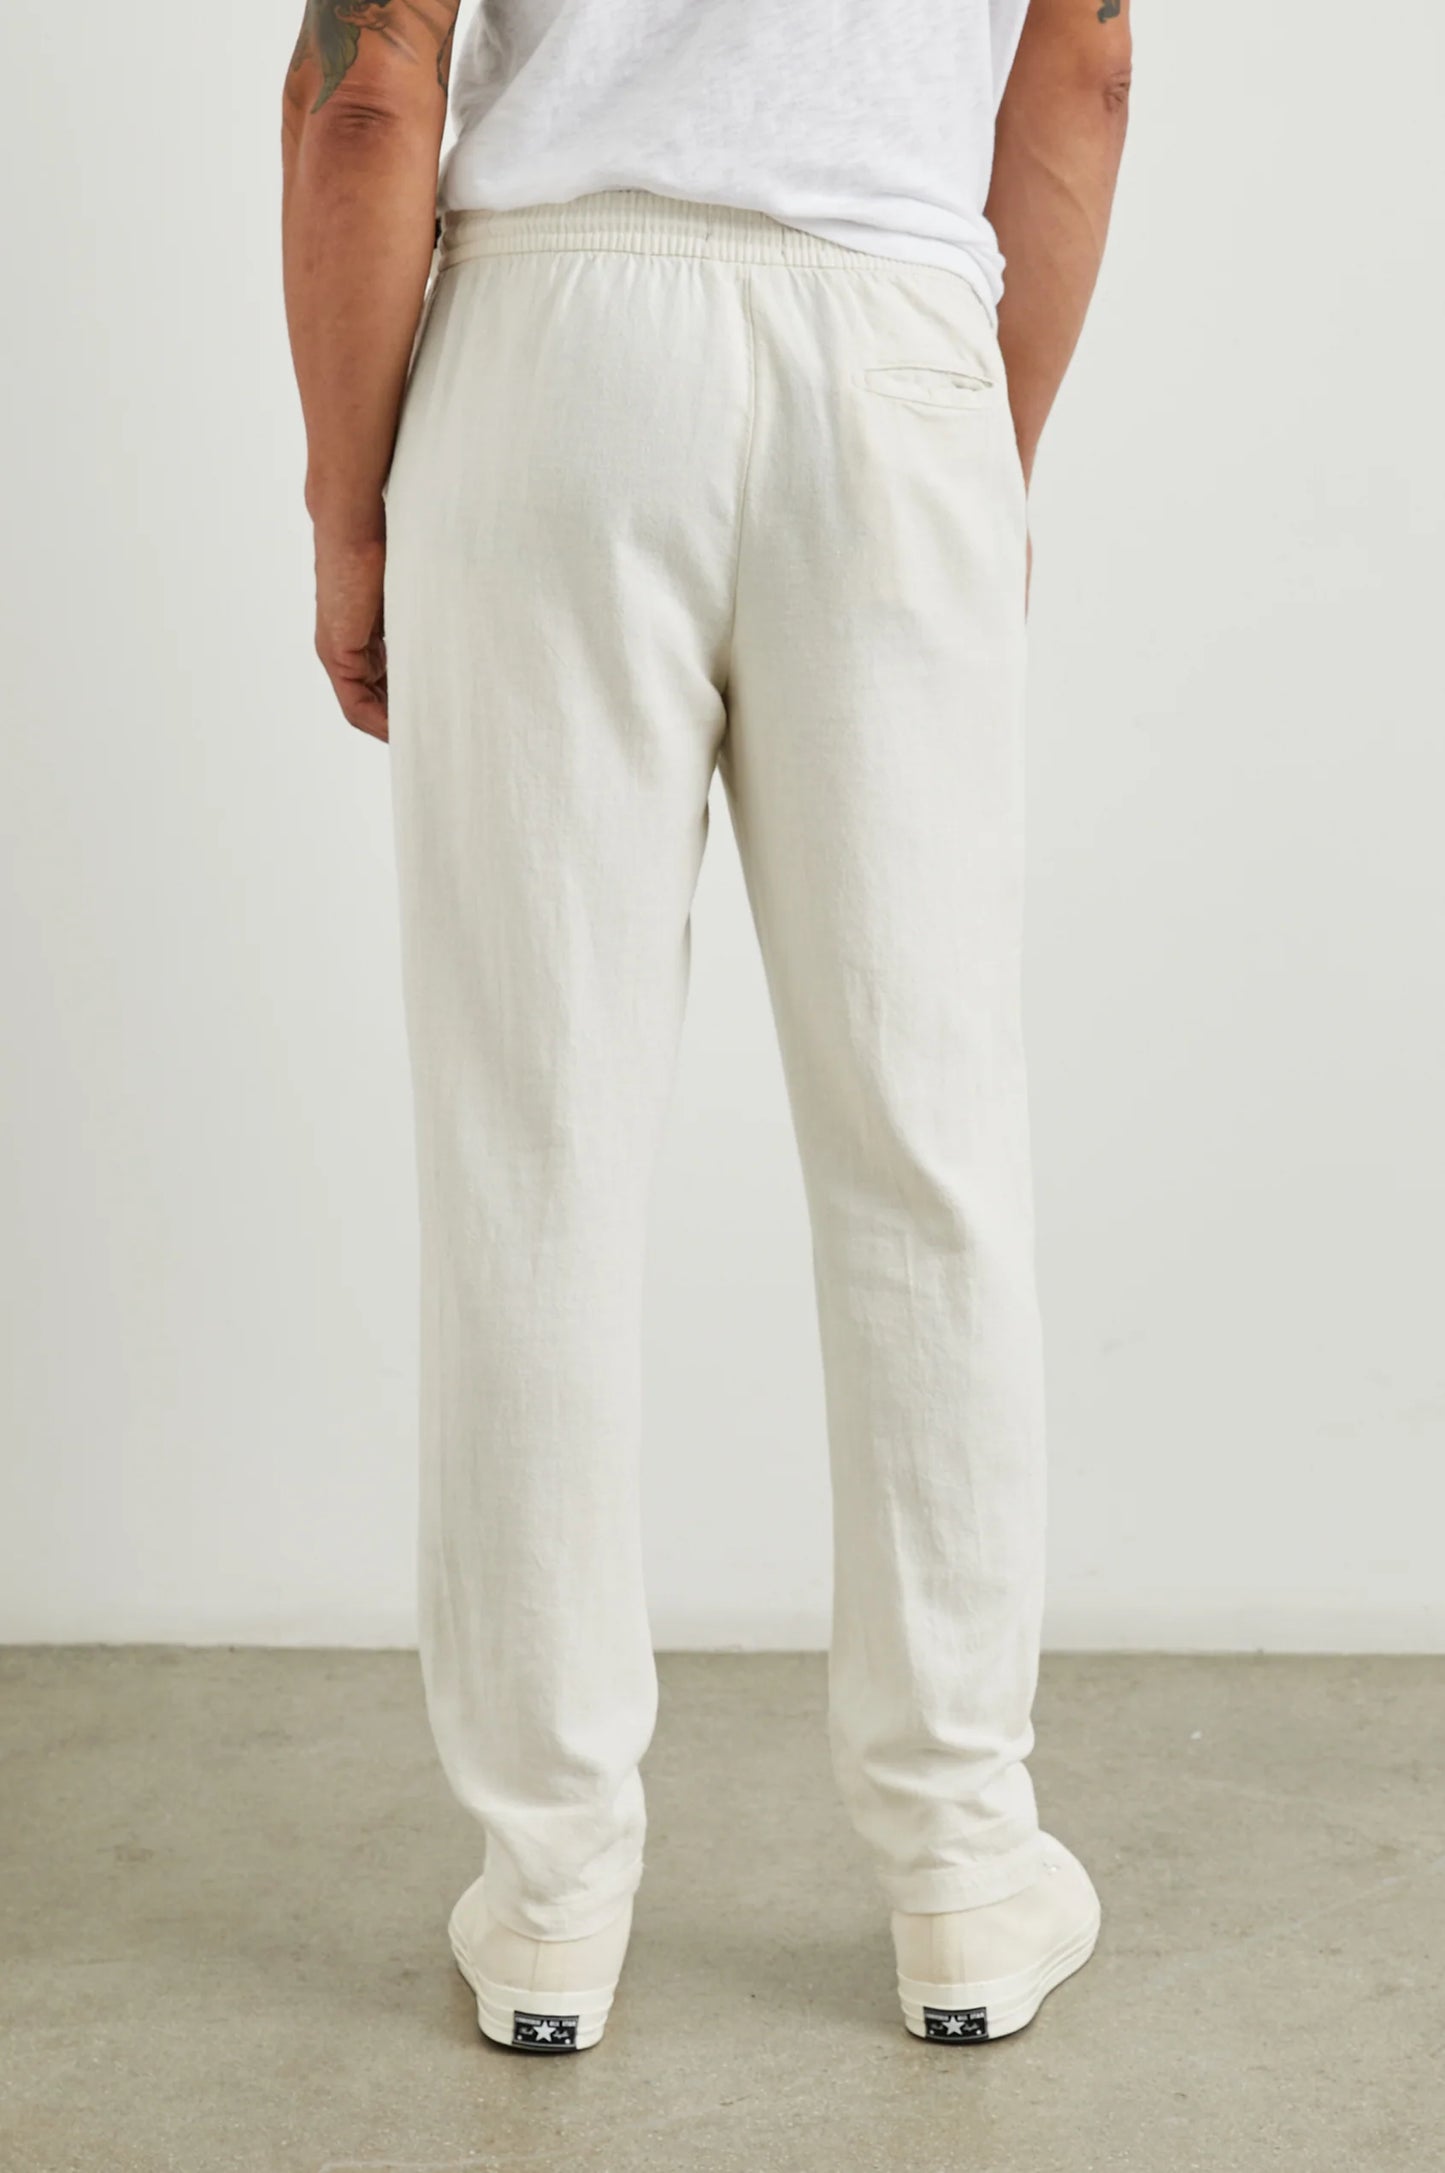 Back view of the Callum Drawstring Men's Pant in the color Ecru by Rails